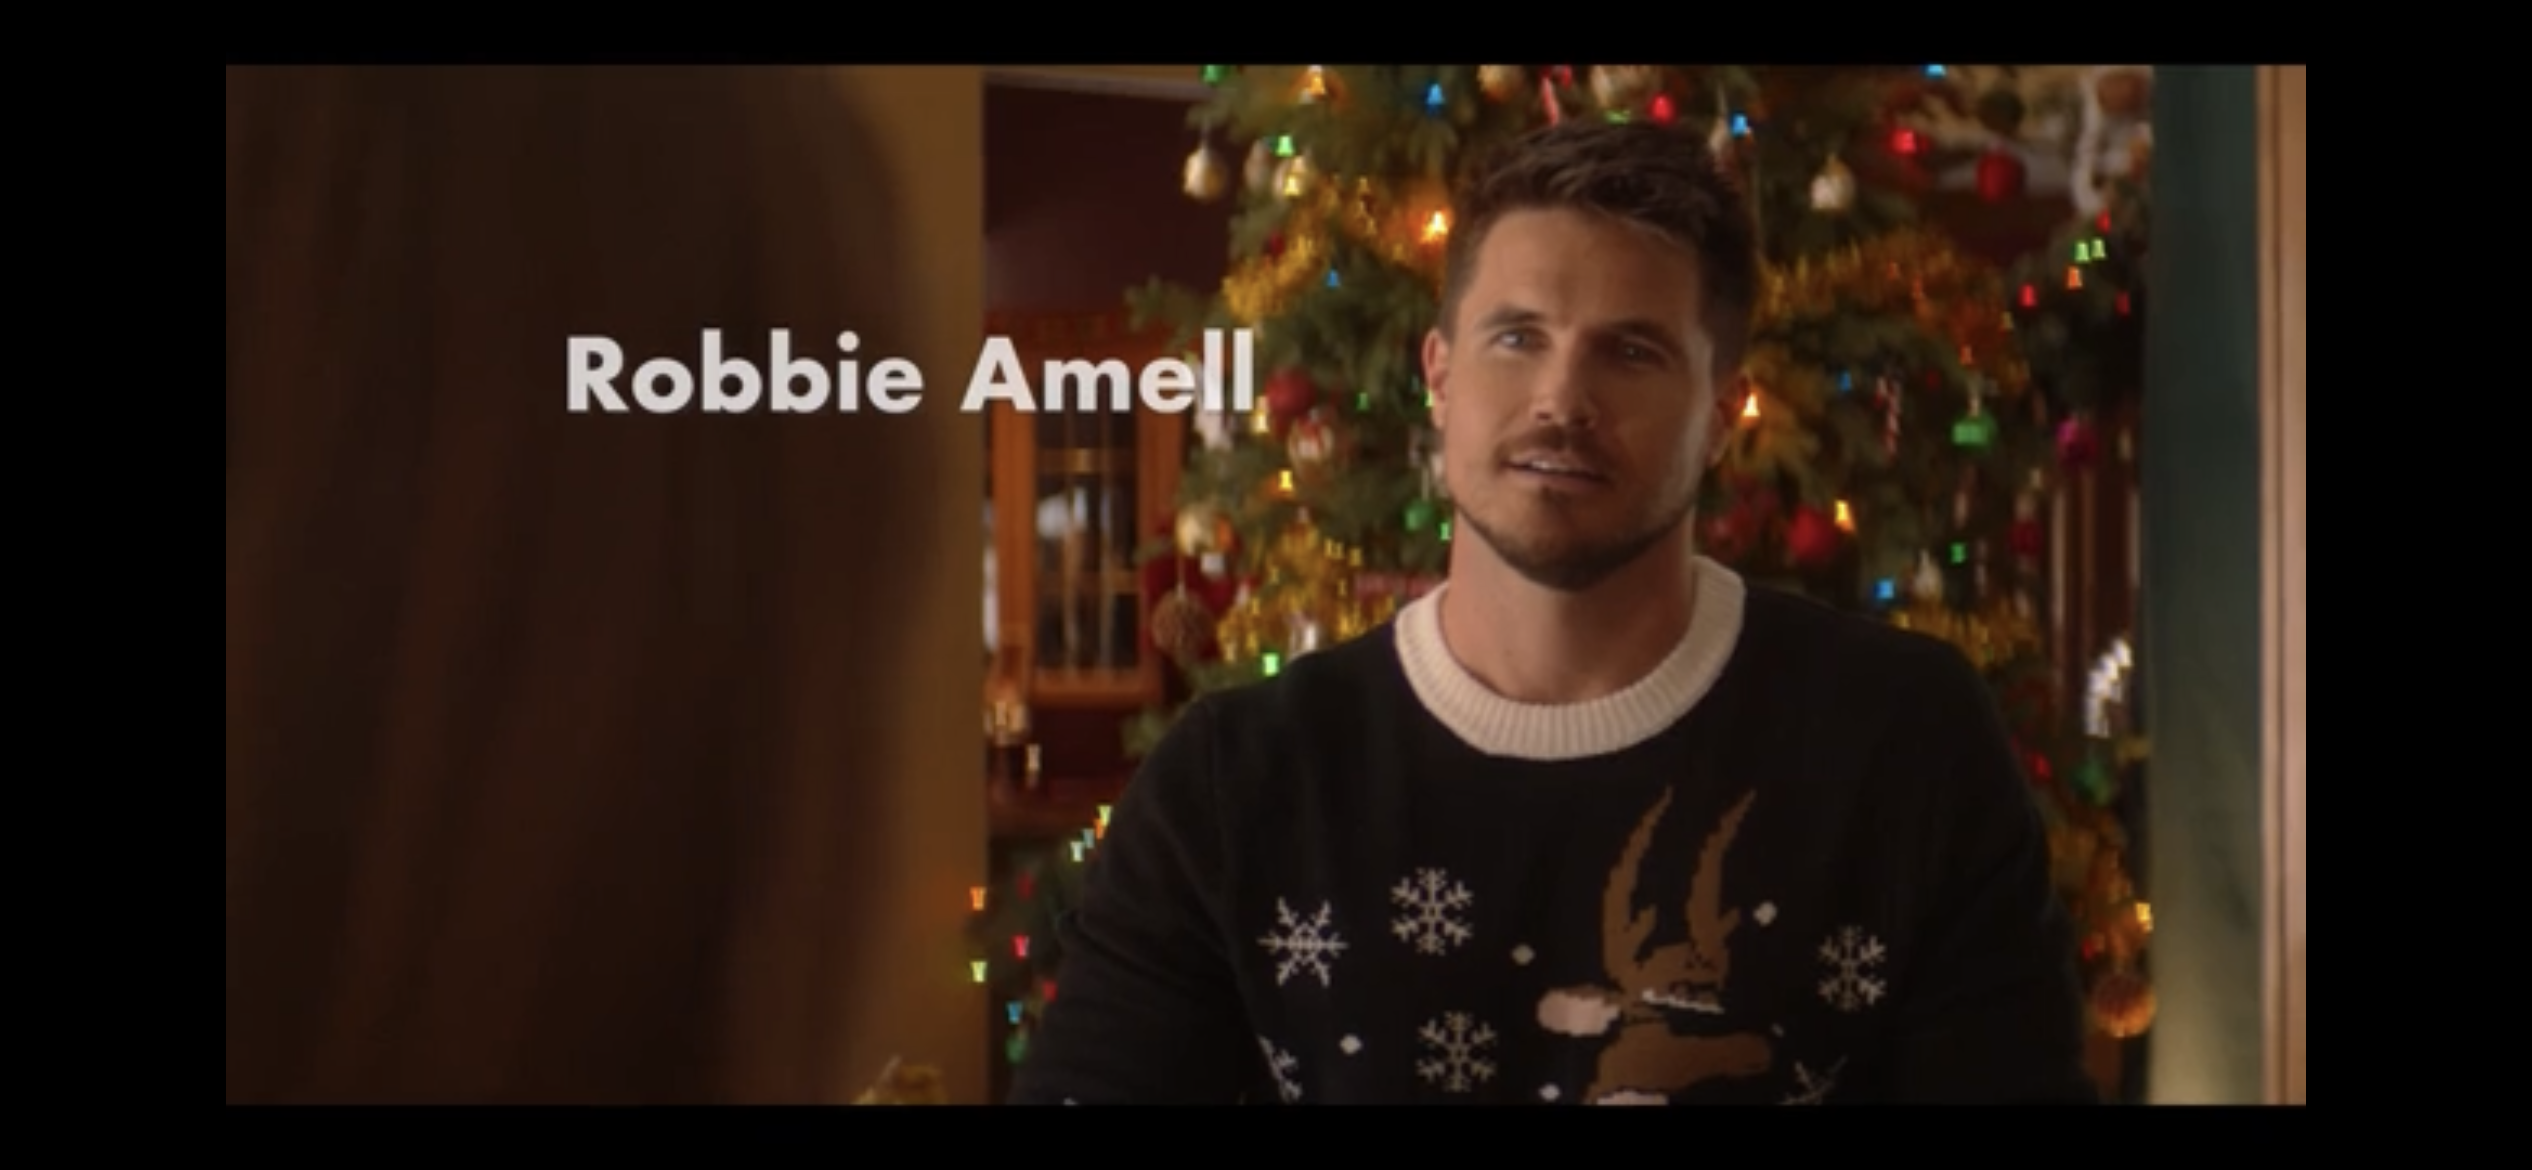 Robbie Amell in Christmas sweater